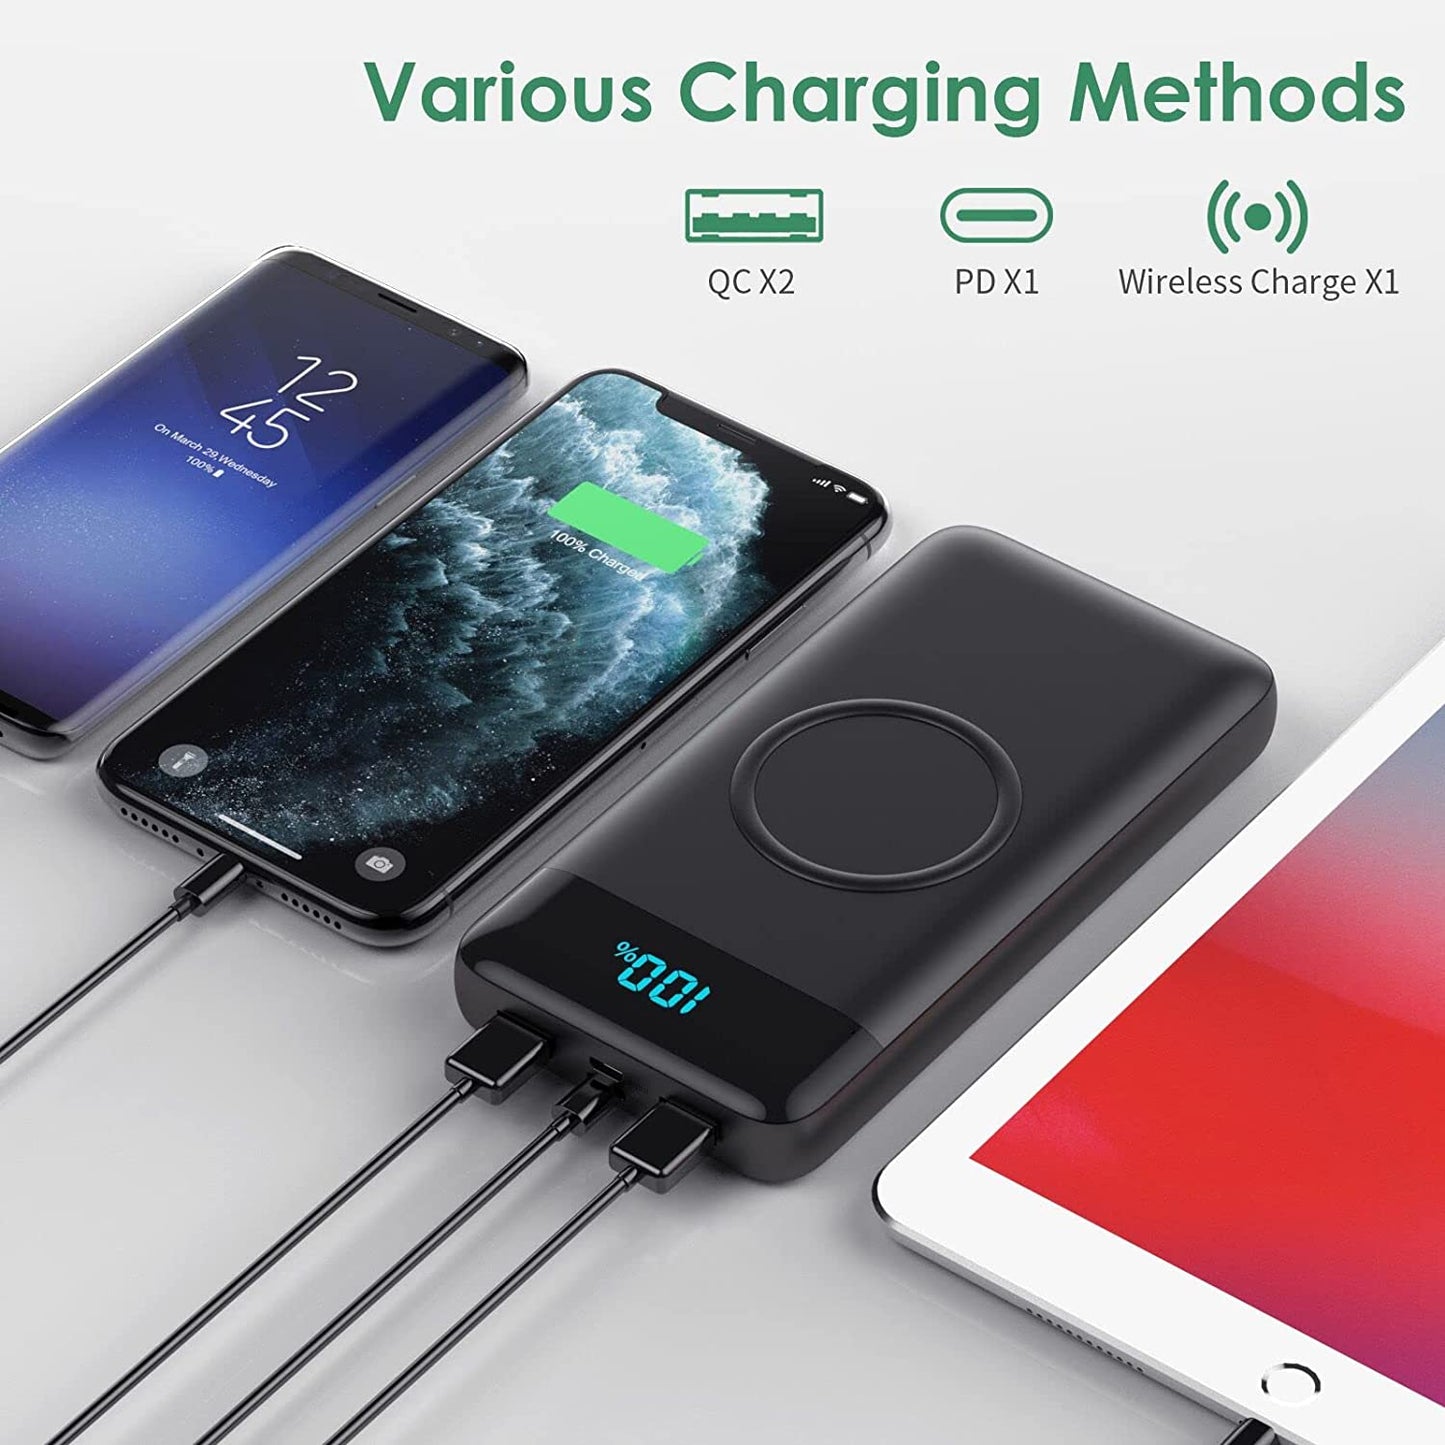 30,800mAh Wireless Portable Charger with 15W Wireless Charging, 25W PD QC4.0 Fast Charging, Smart LED Display, USB-C Power Bank, 4 Output & 2 Input for Smartphones